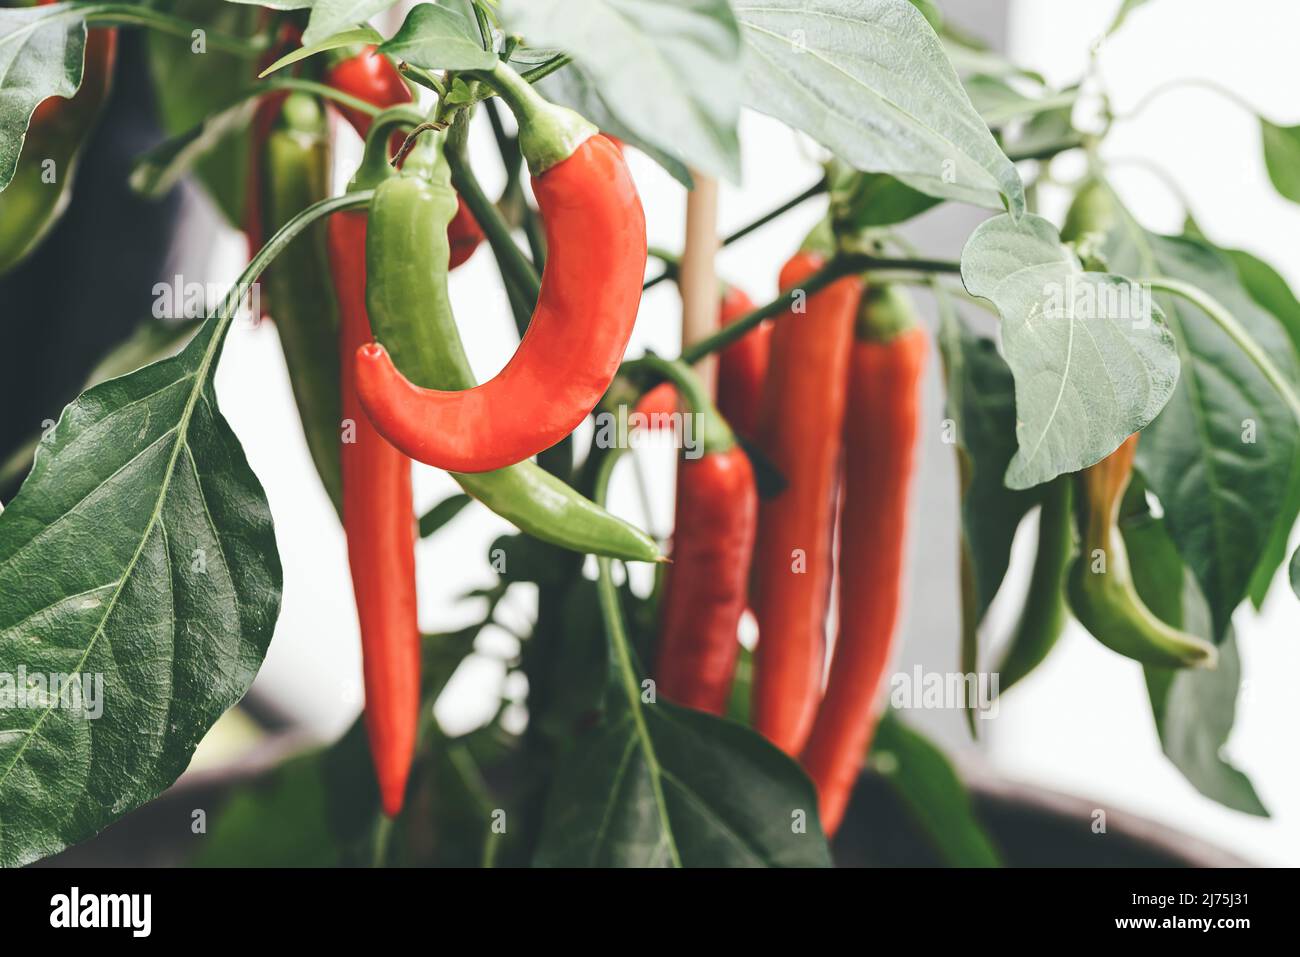 close-up view of red and green chili peppers on plant Stock Photo